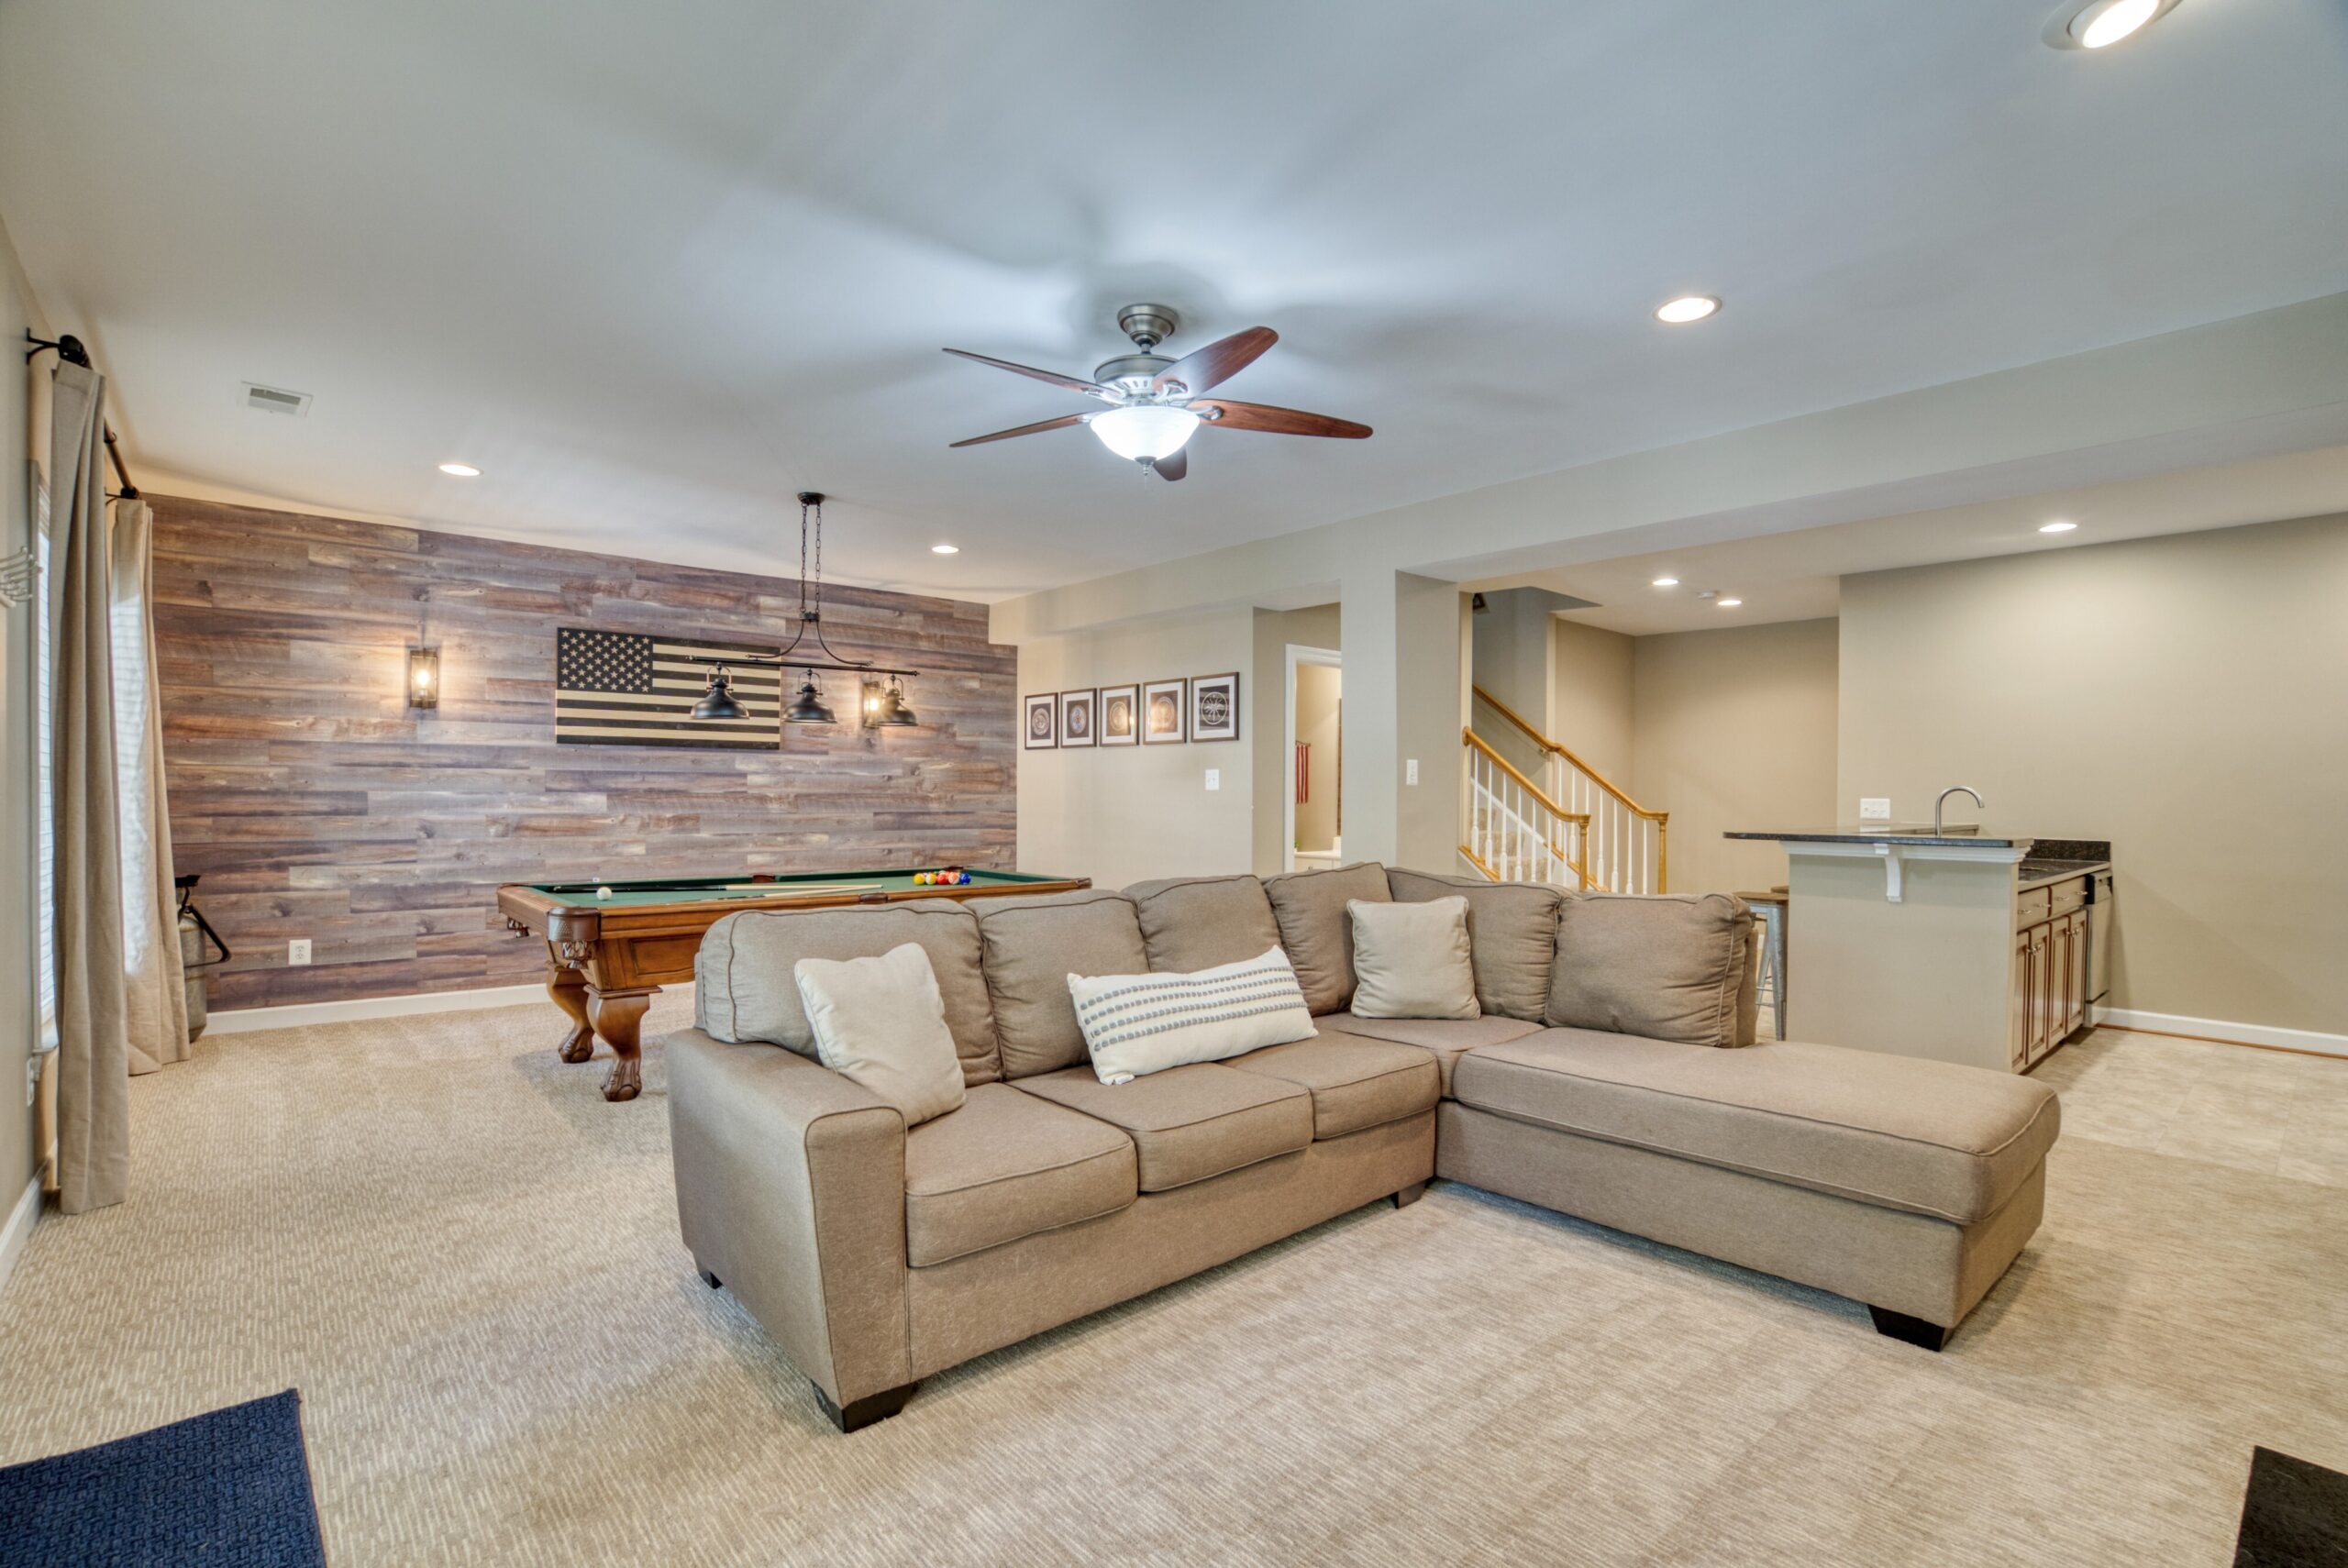 Basement living area in 3-story townhome showing large sectional couch, pool table behind and statement shiplap wall